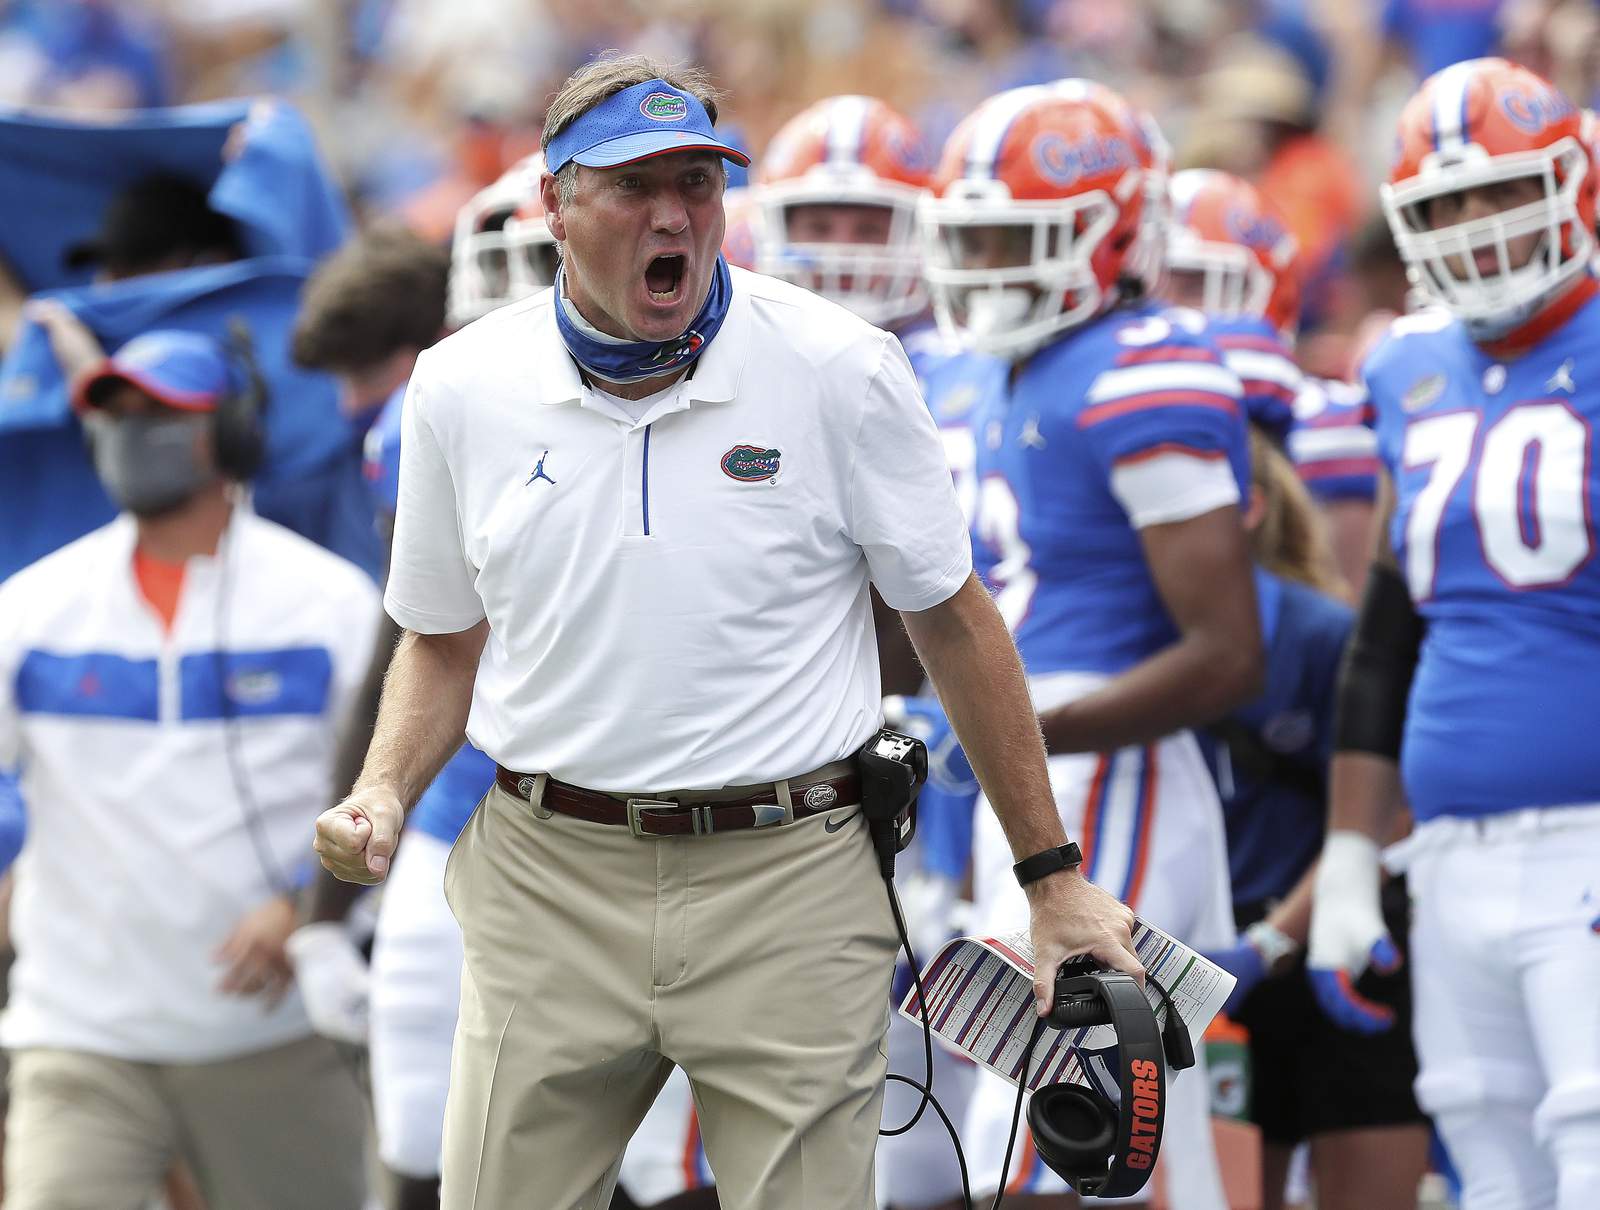 Florida coach Dan Mullen apologizes, awaits word on COVID-19 tests, LSU game